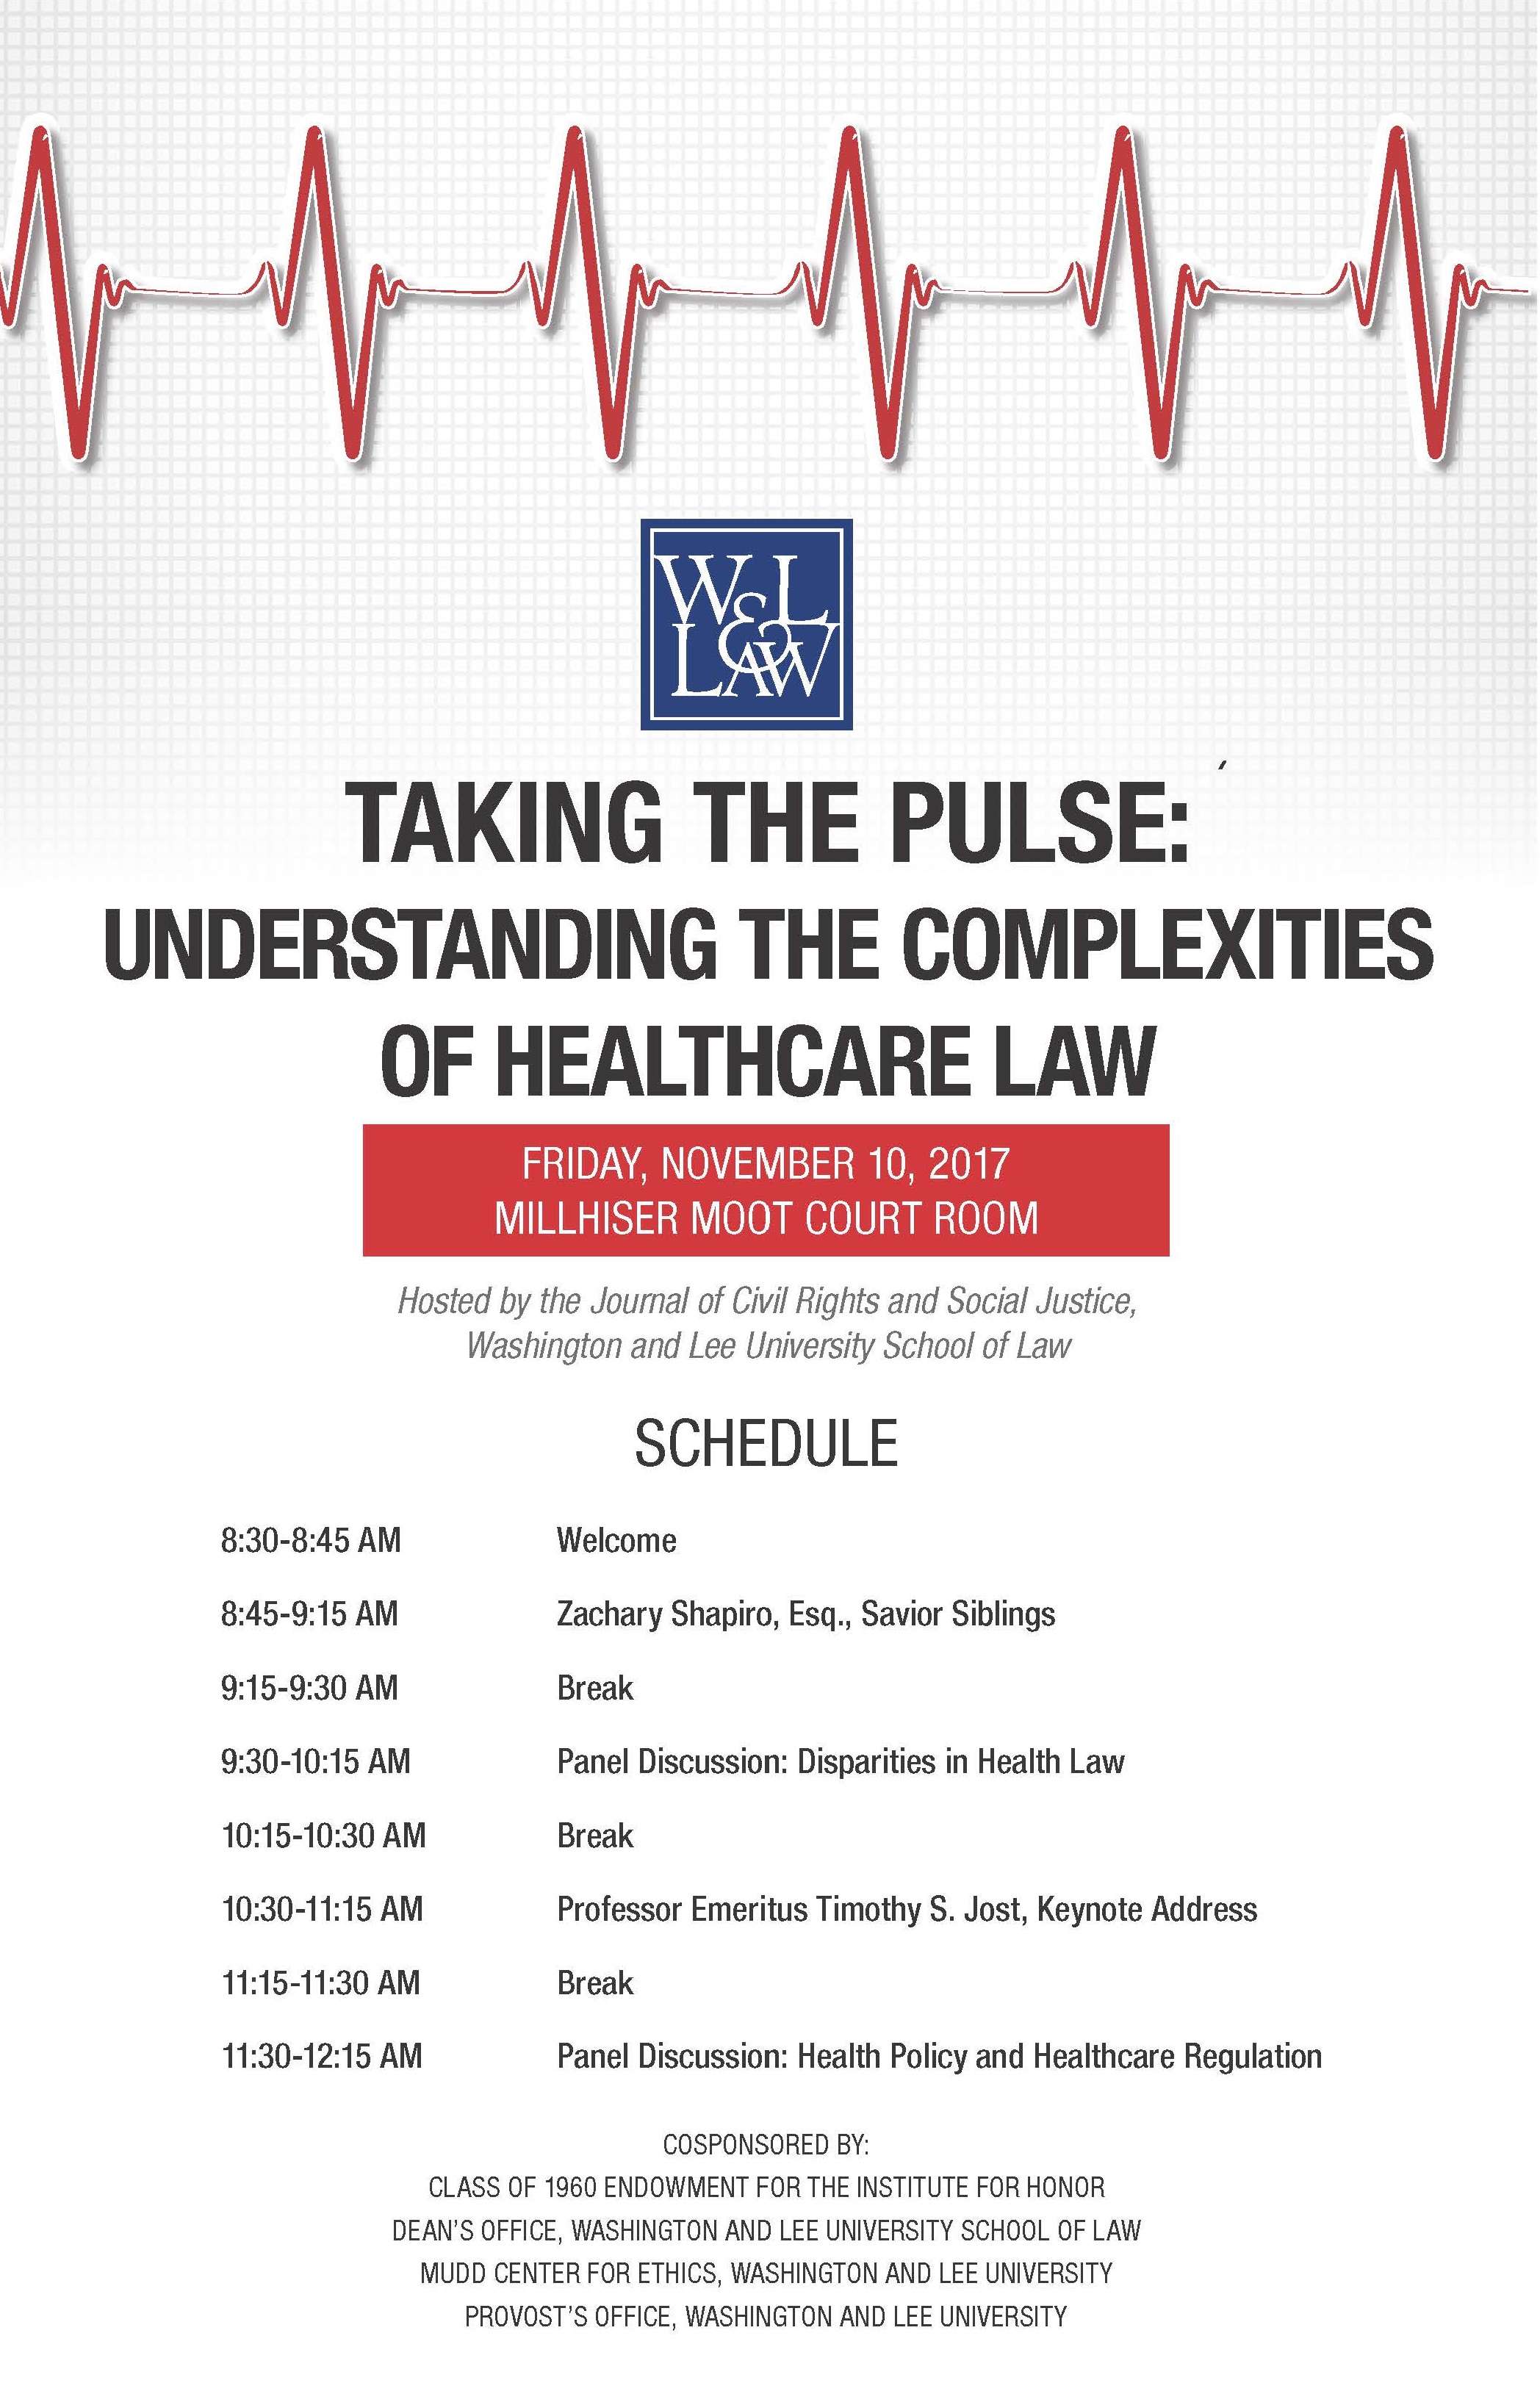 2017: Taking the Pulse: Understanding the Complexities of Healthcare Law